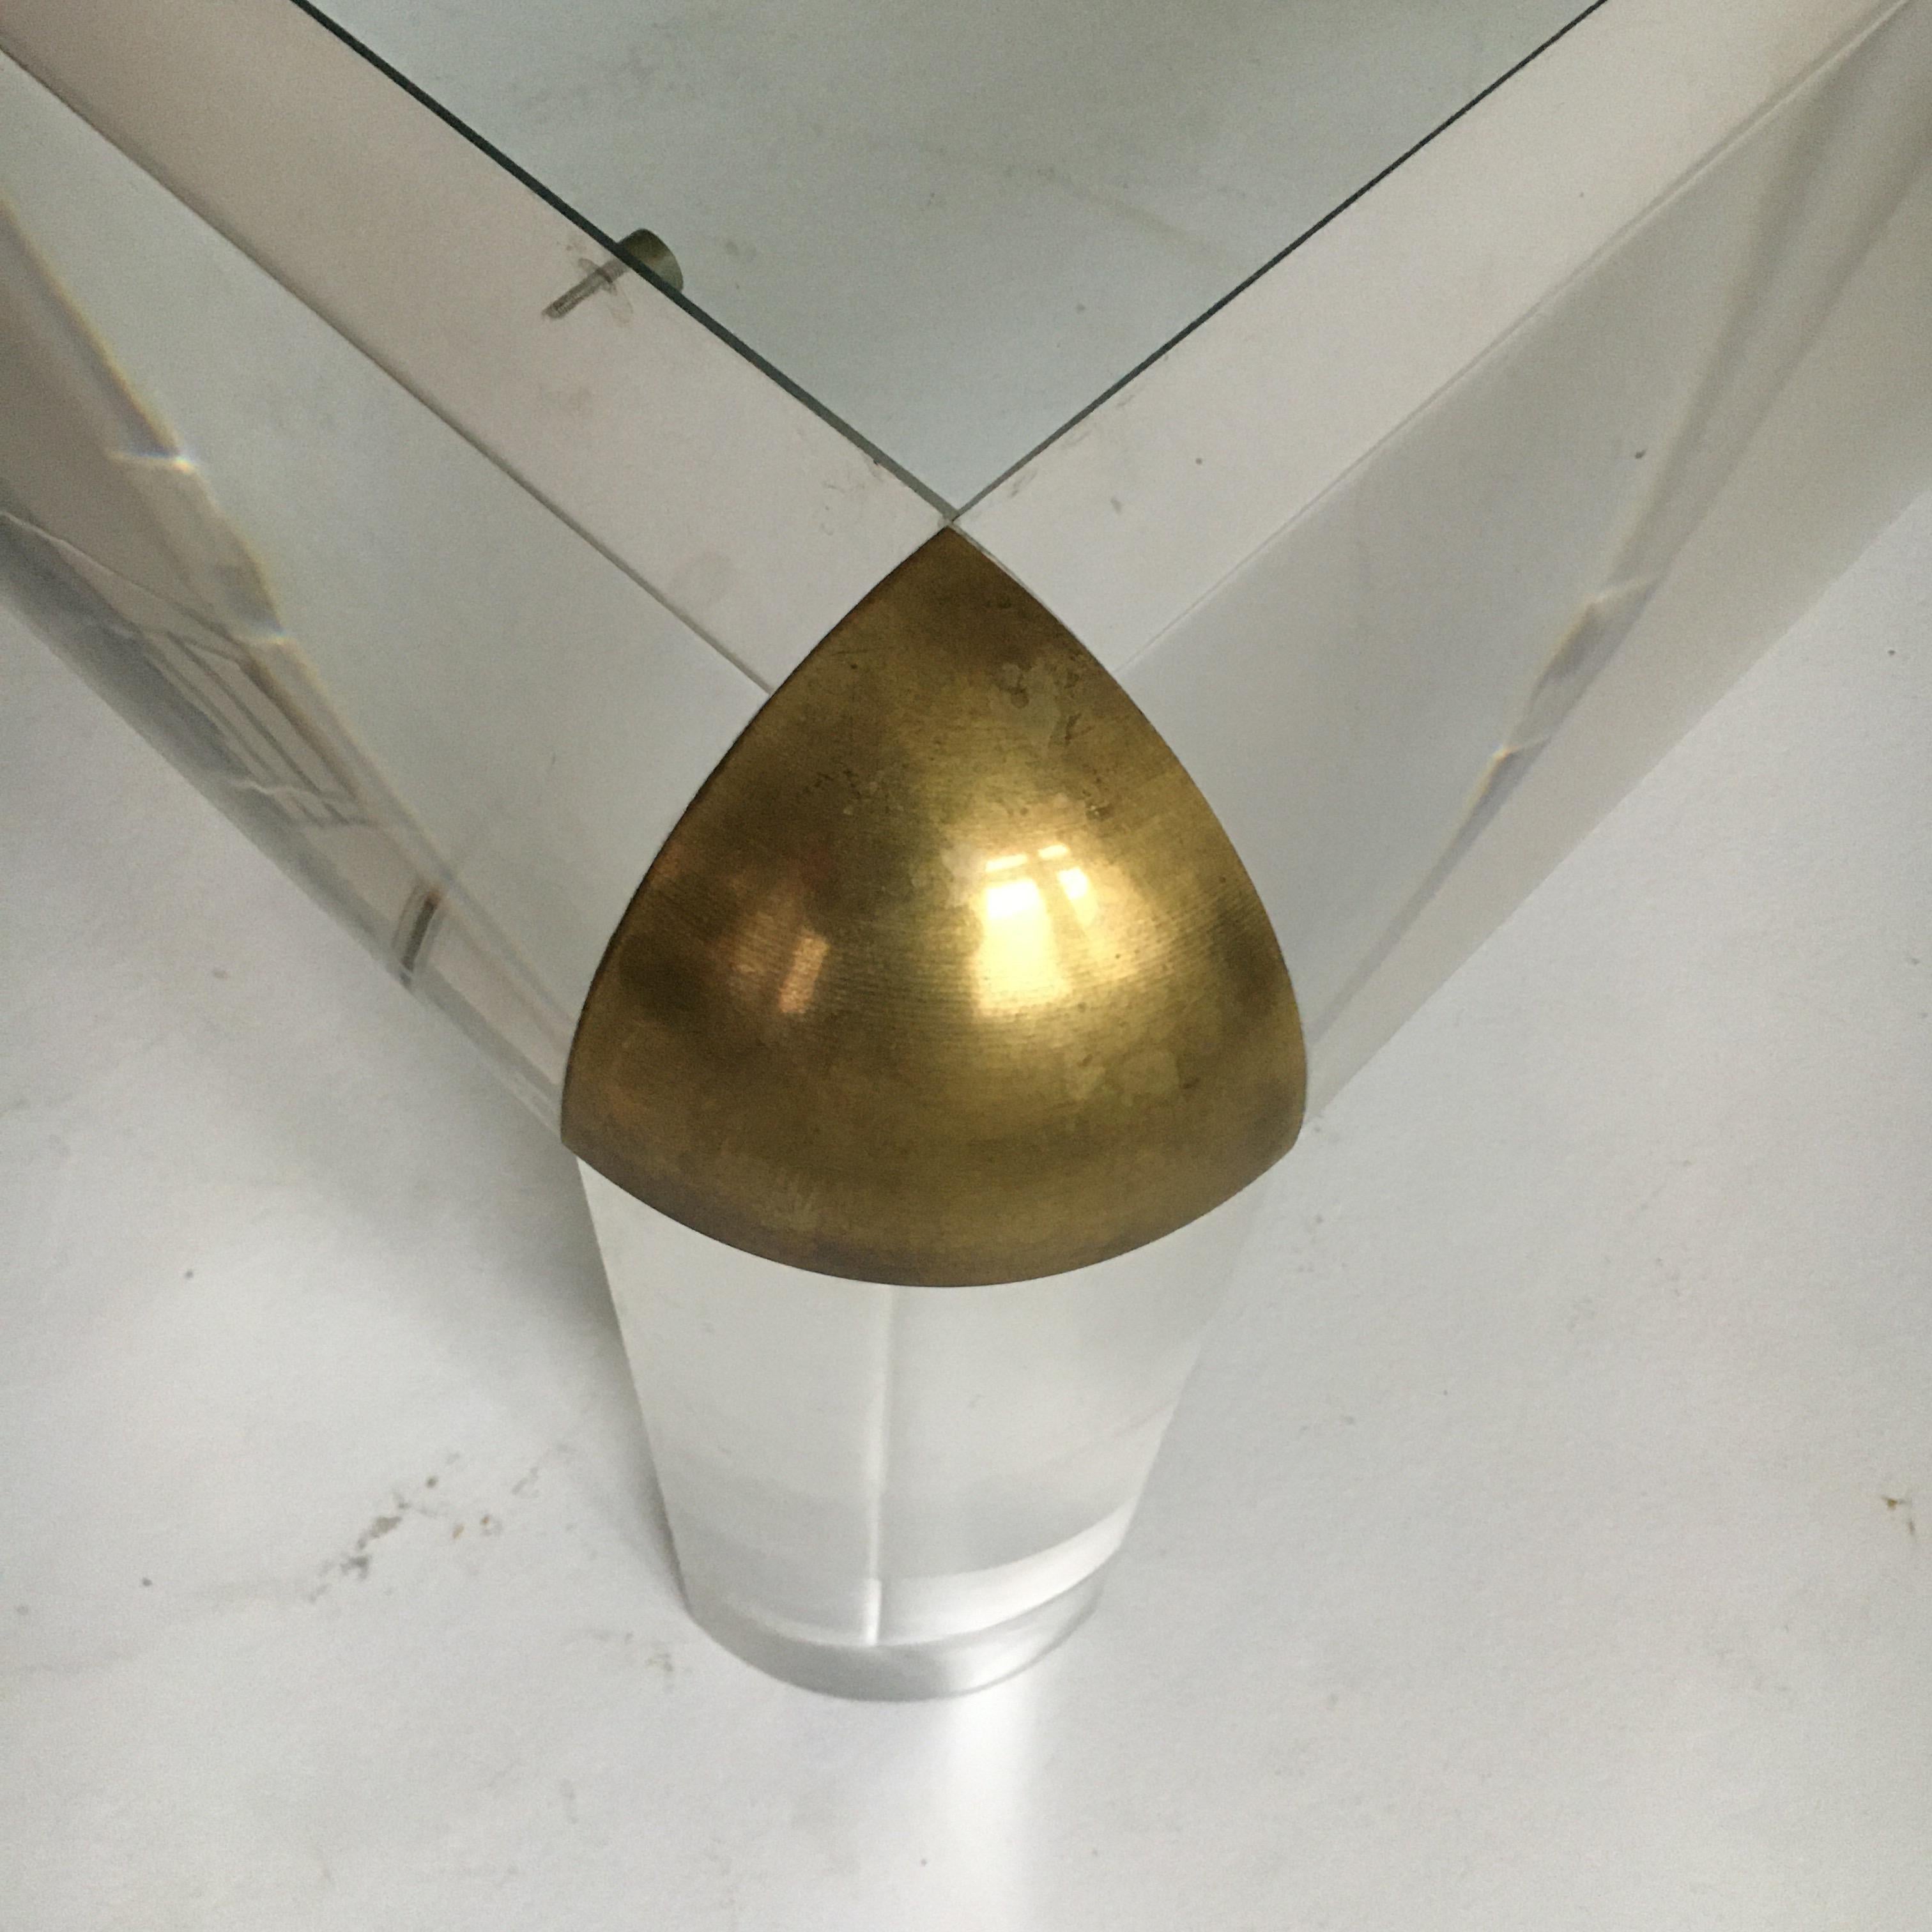 Lucite brass coffee table Karl Springer style, Italy, 1970s.